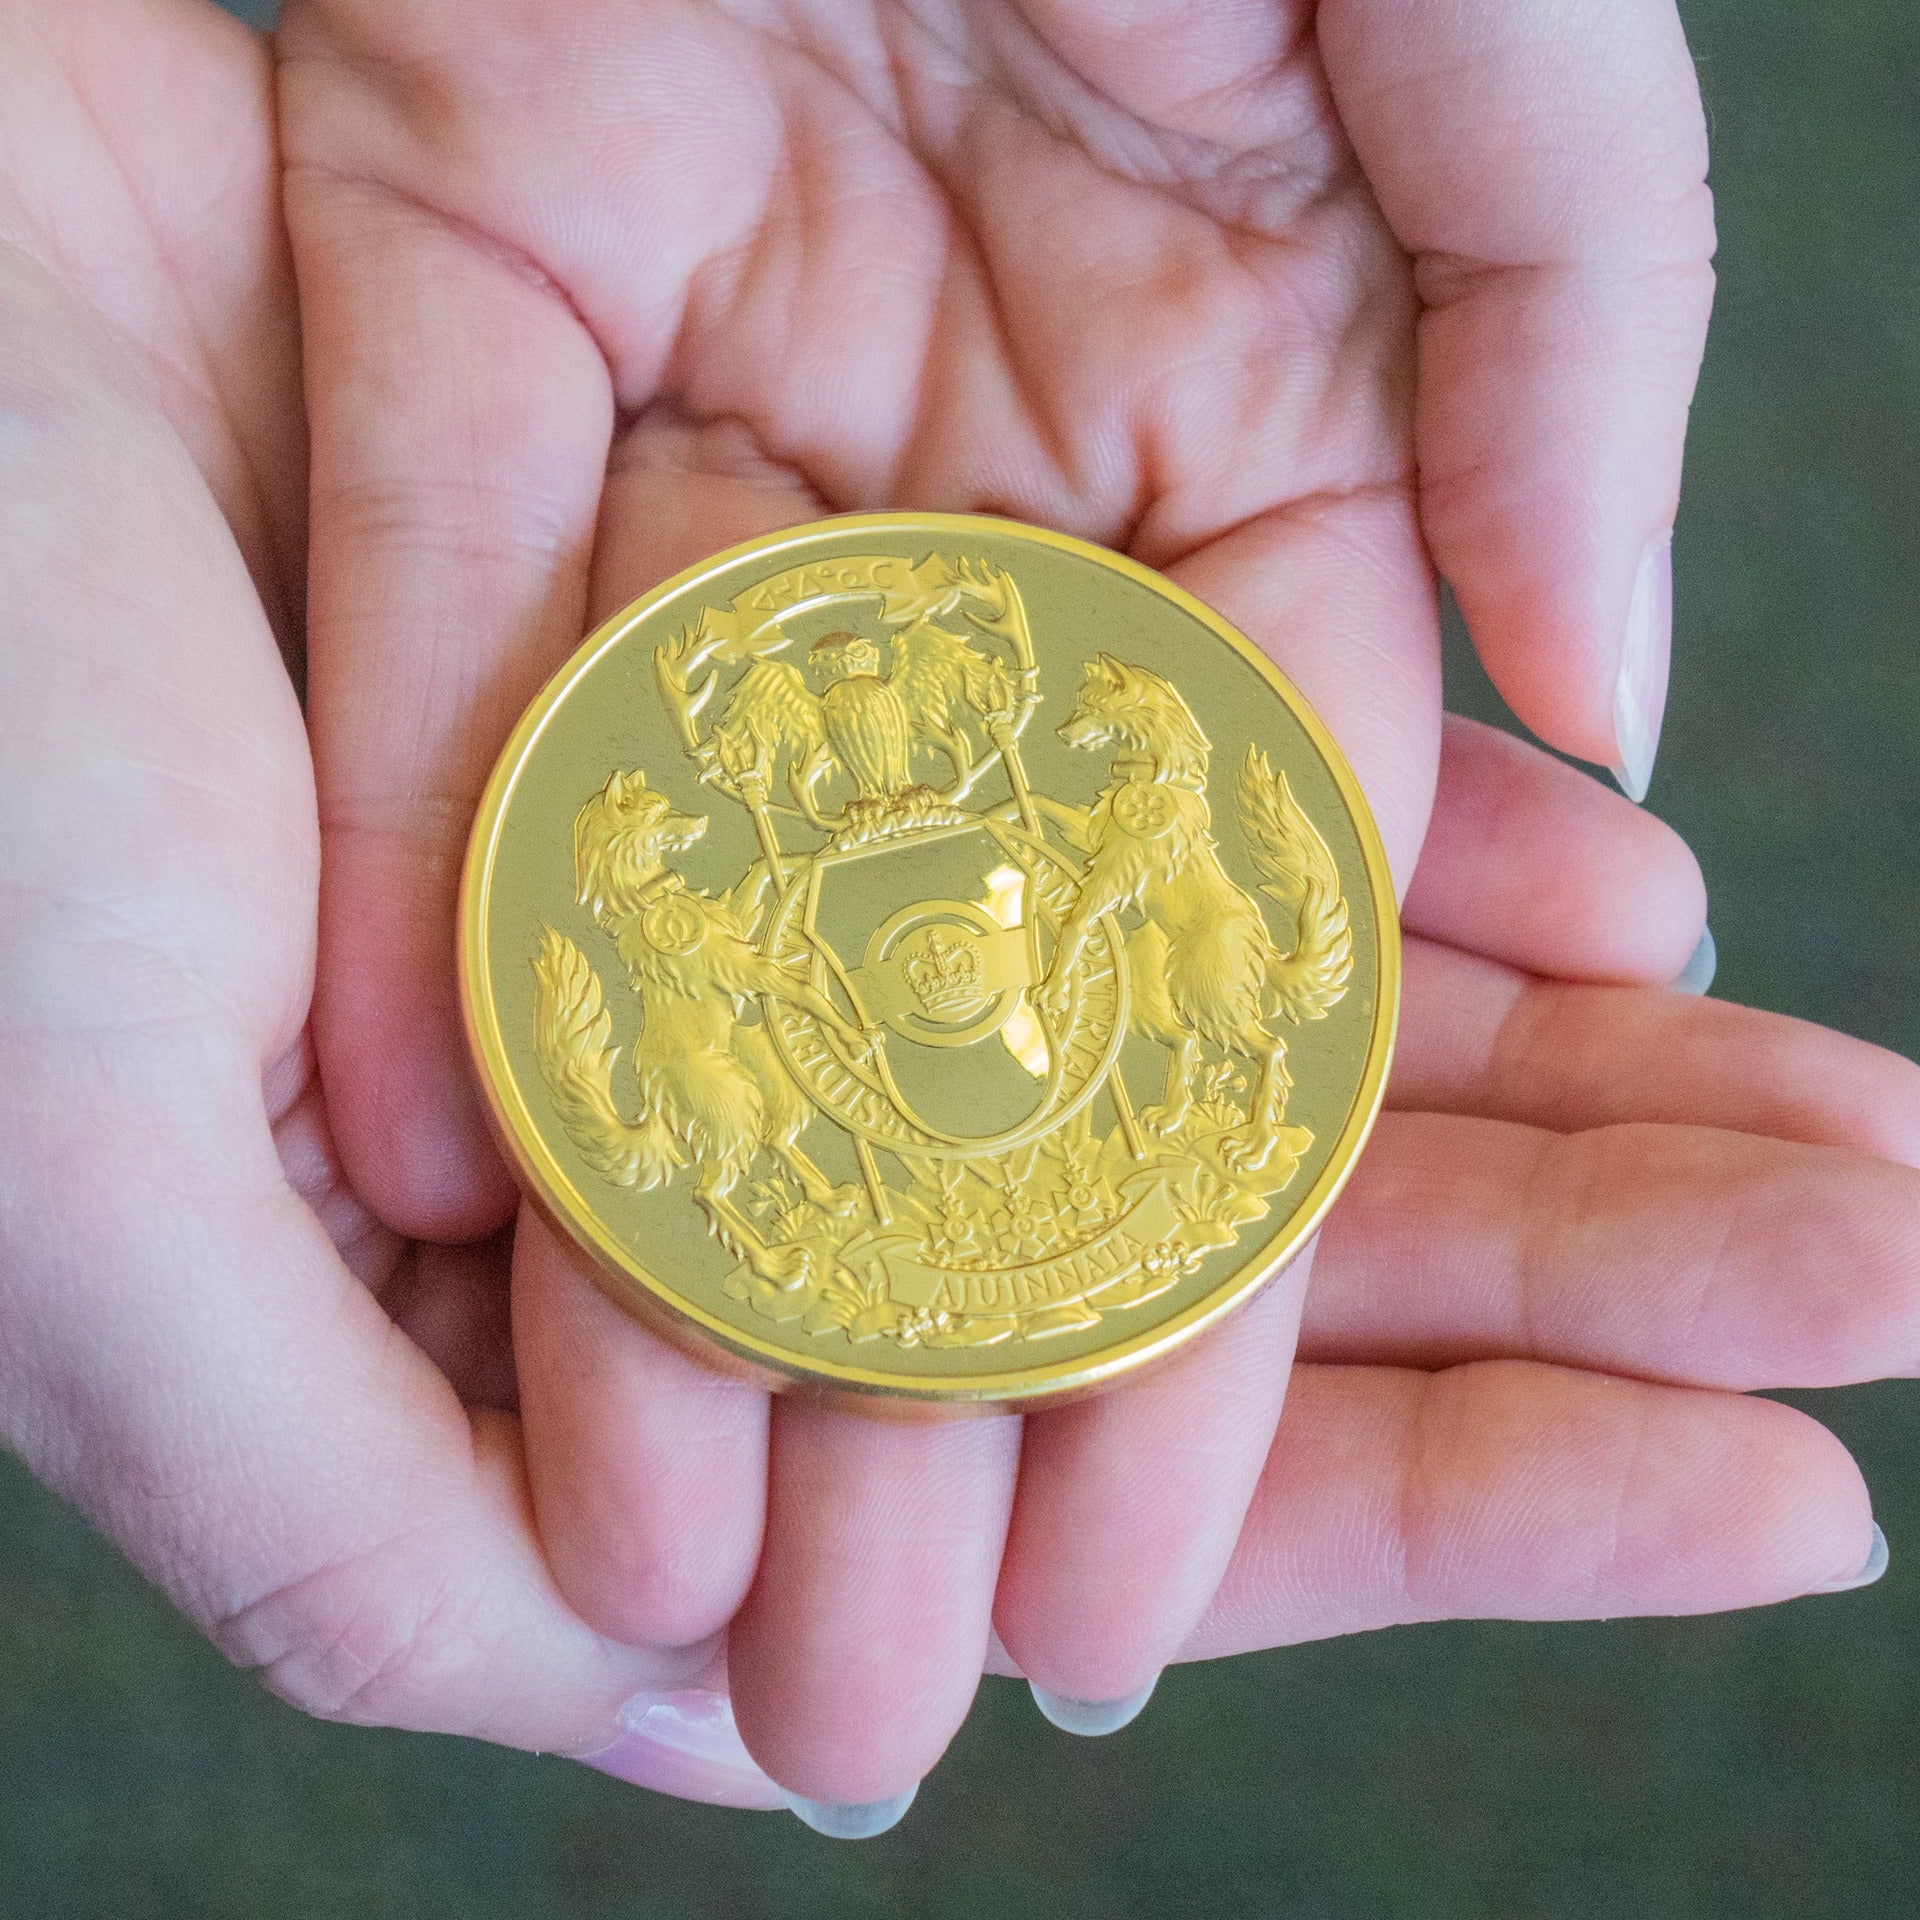 Hand holding Governor General's gold medal